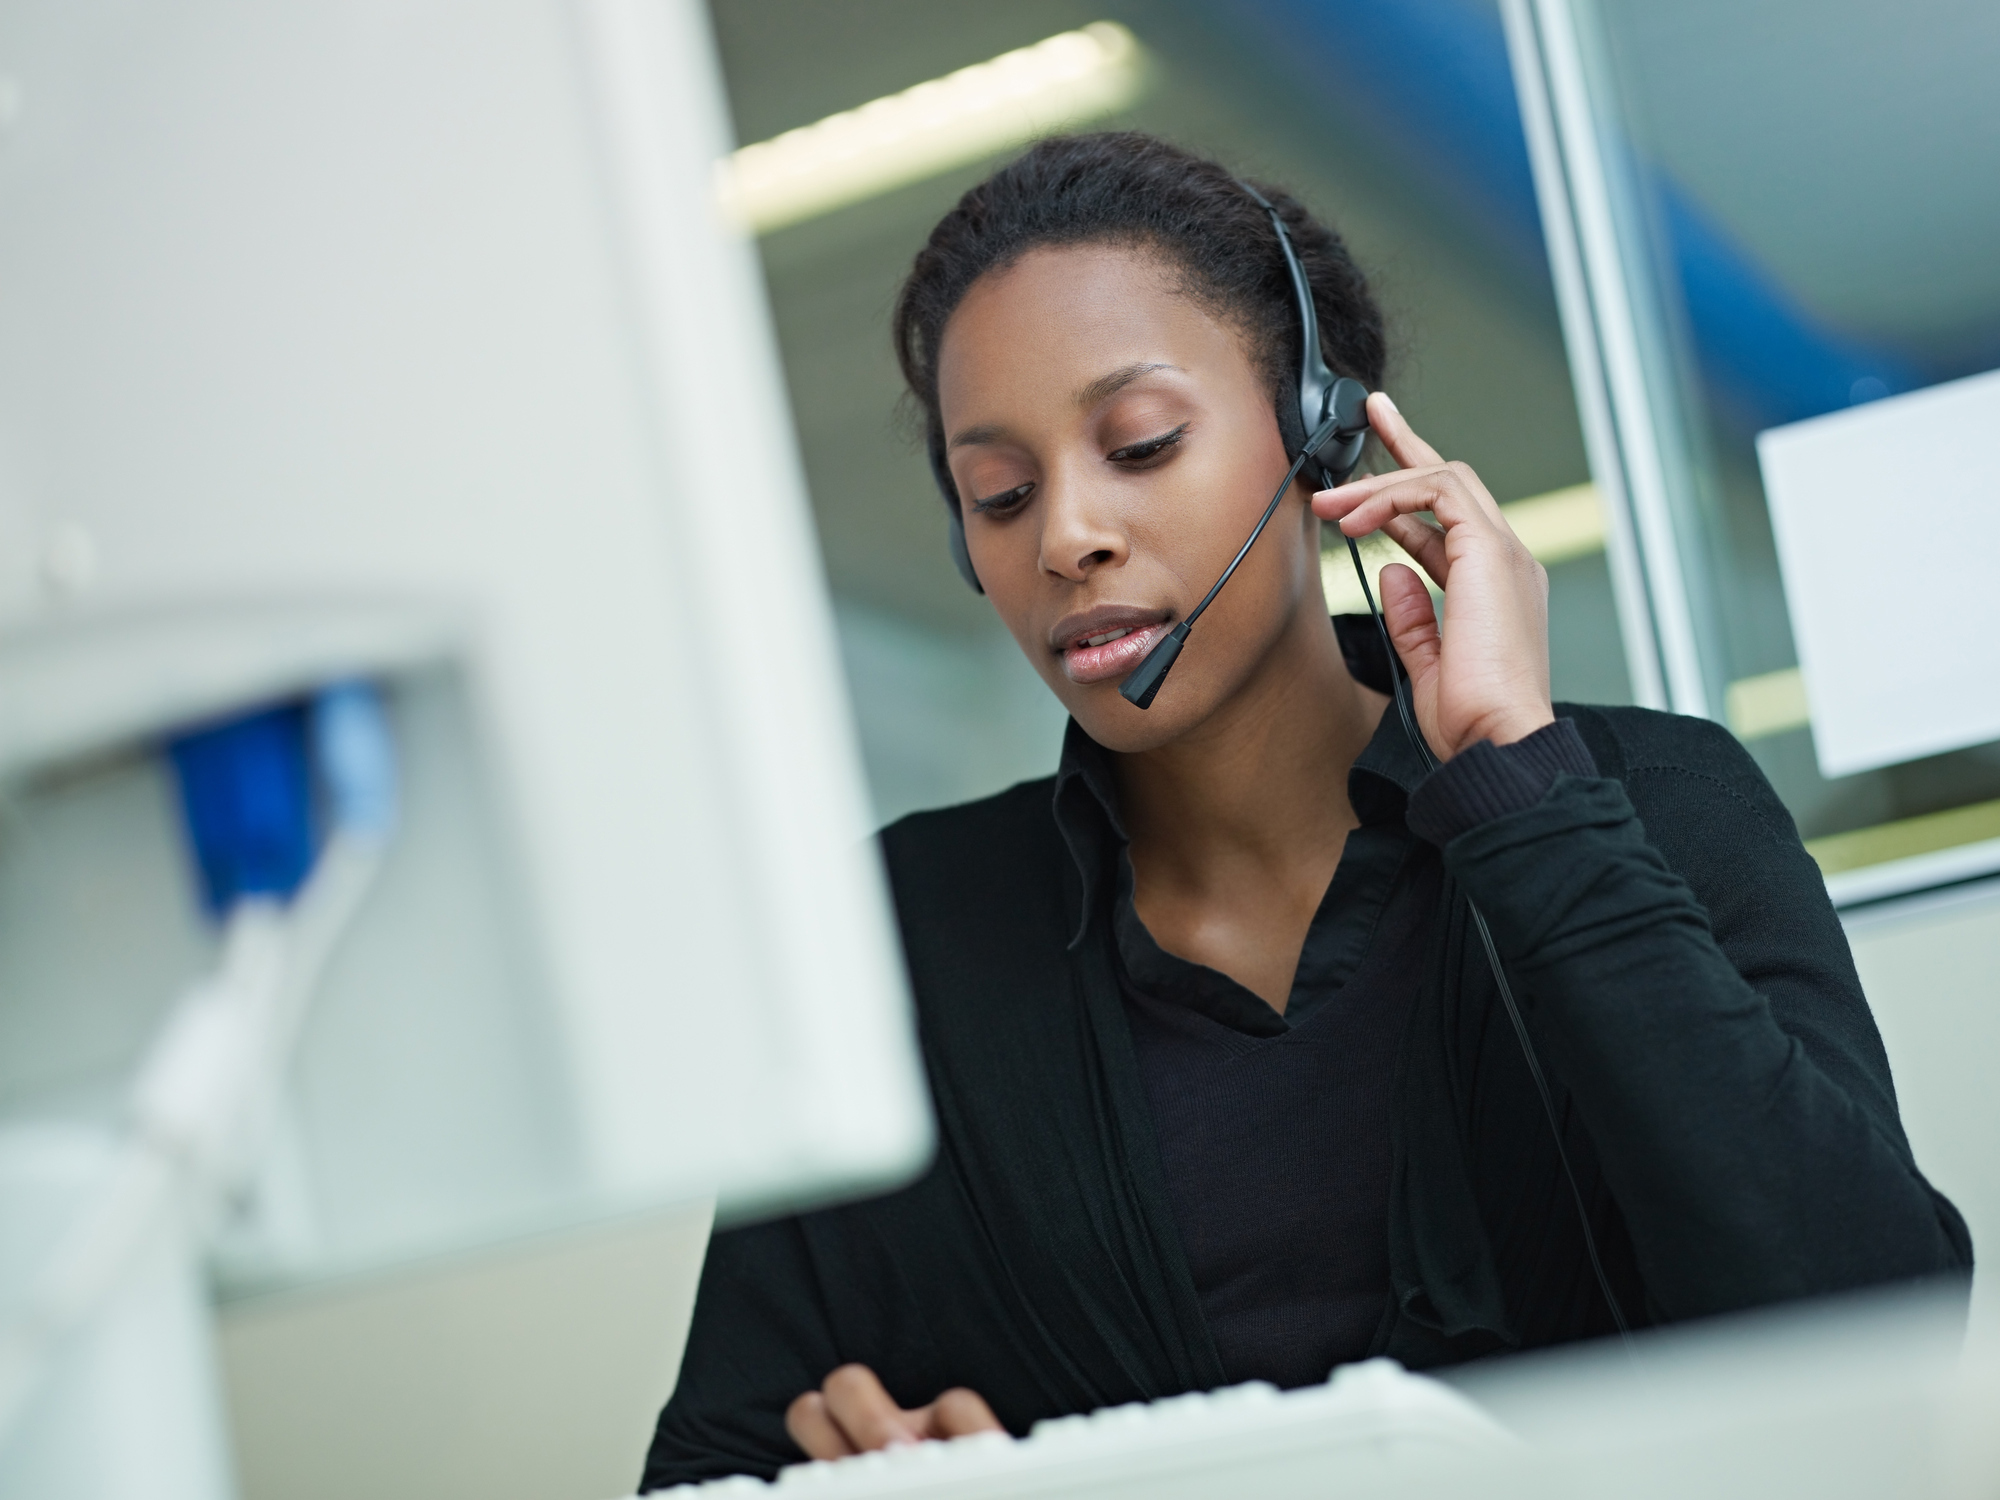 When in doubt, call our customer advocates to help you understand your coverage and get its full value.
